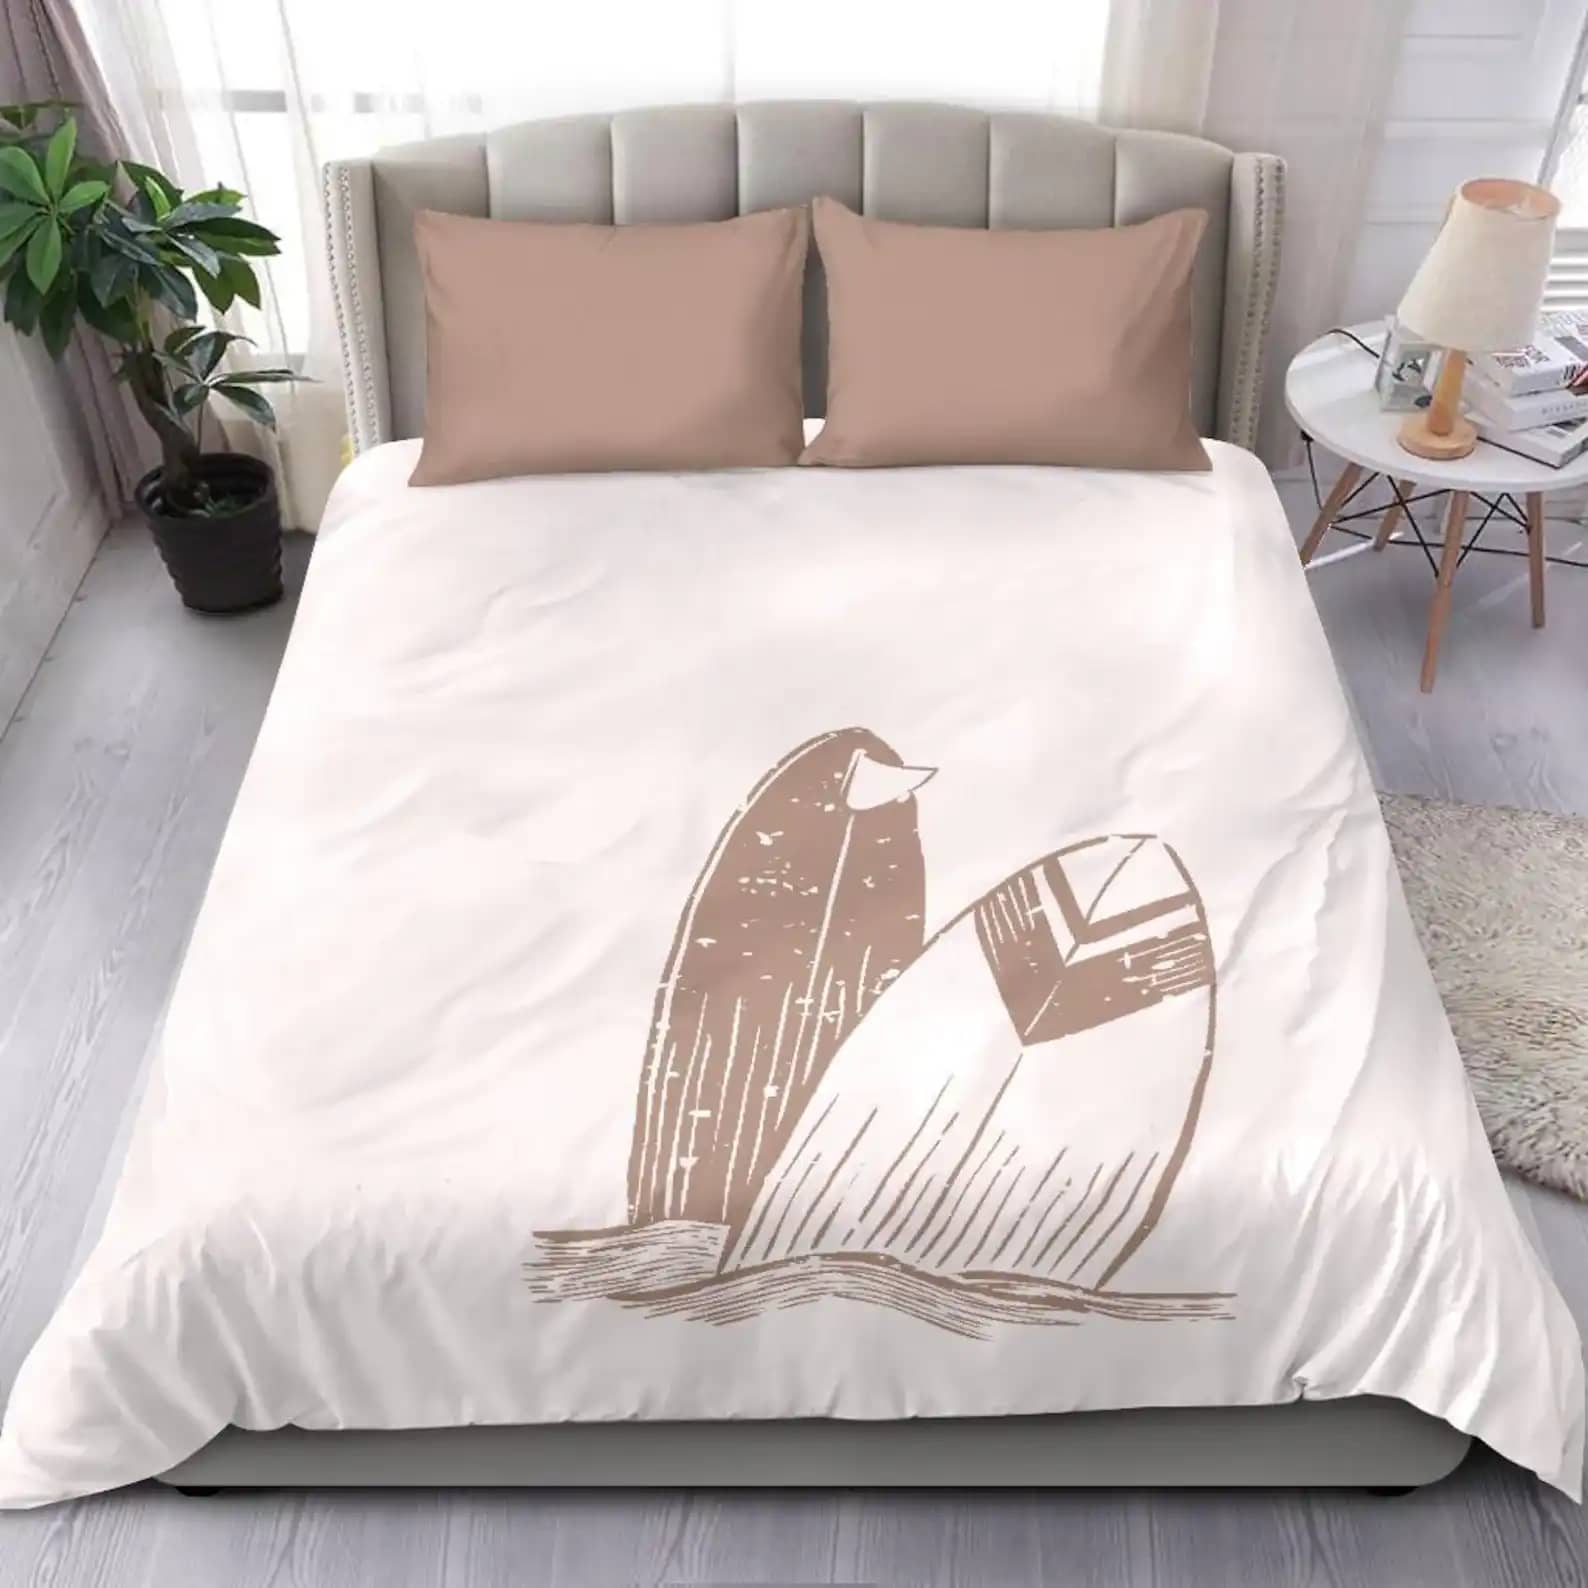 Best Californien Bed Set Duvet Cover With White And Soft Pastel Pink Surf Board In The Ocean Quilt Bedding Sets